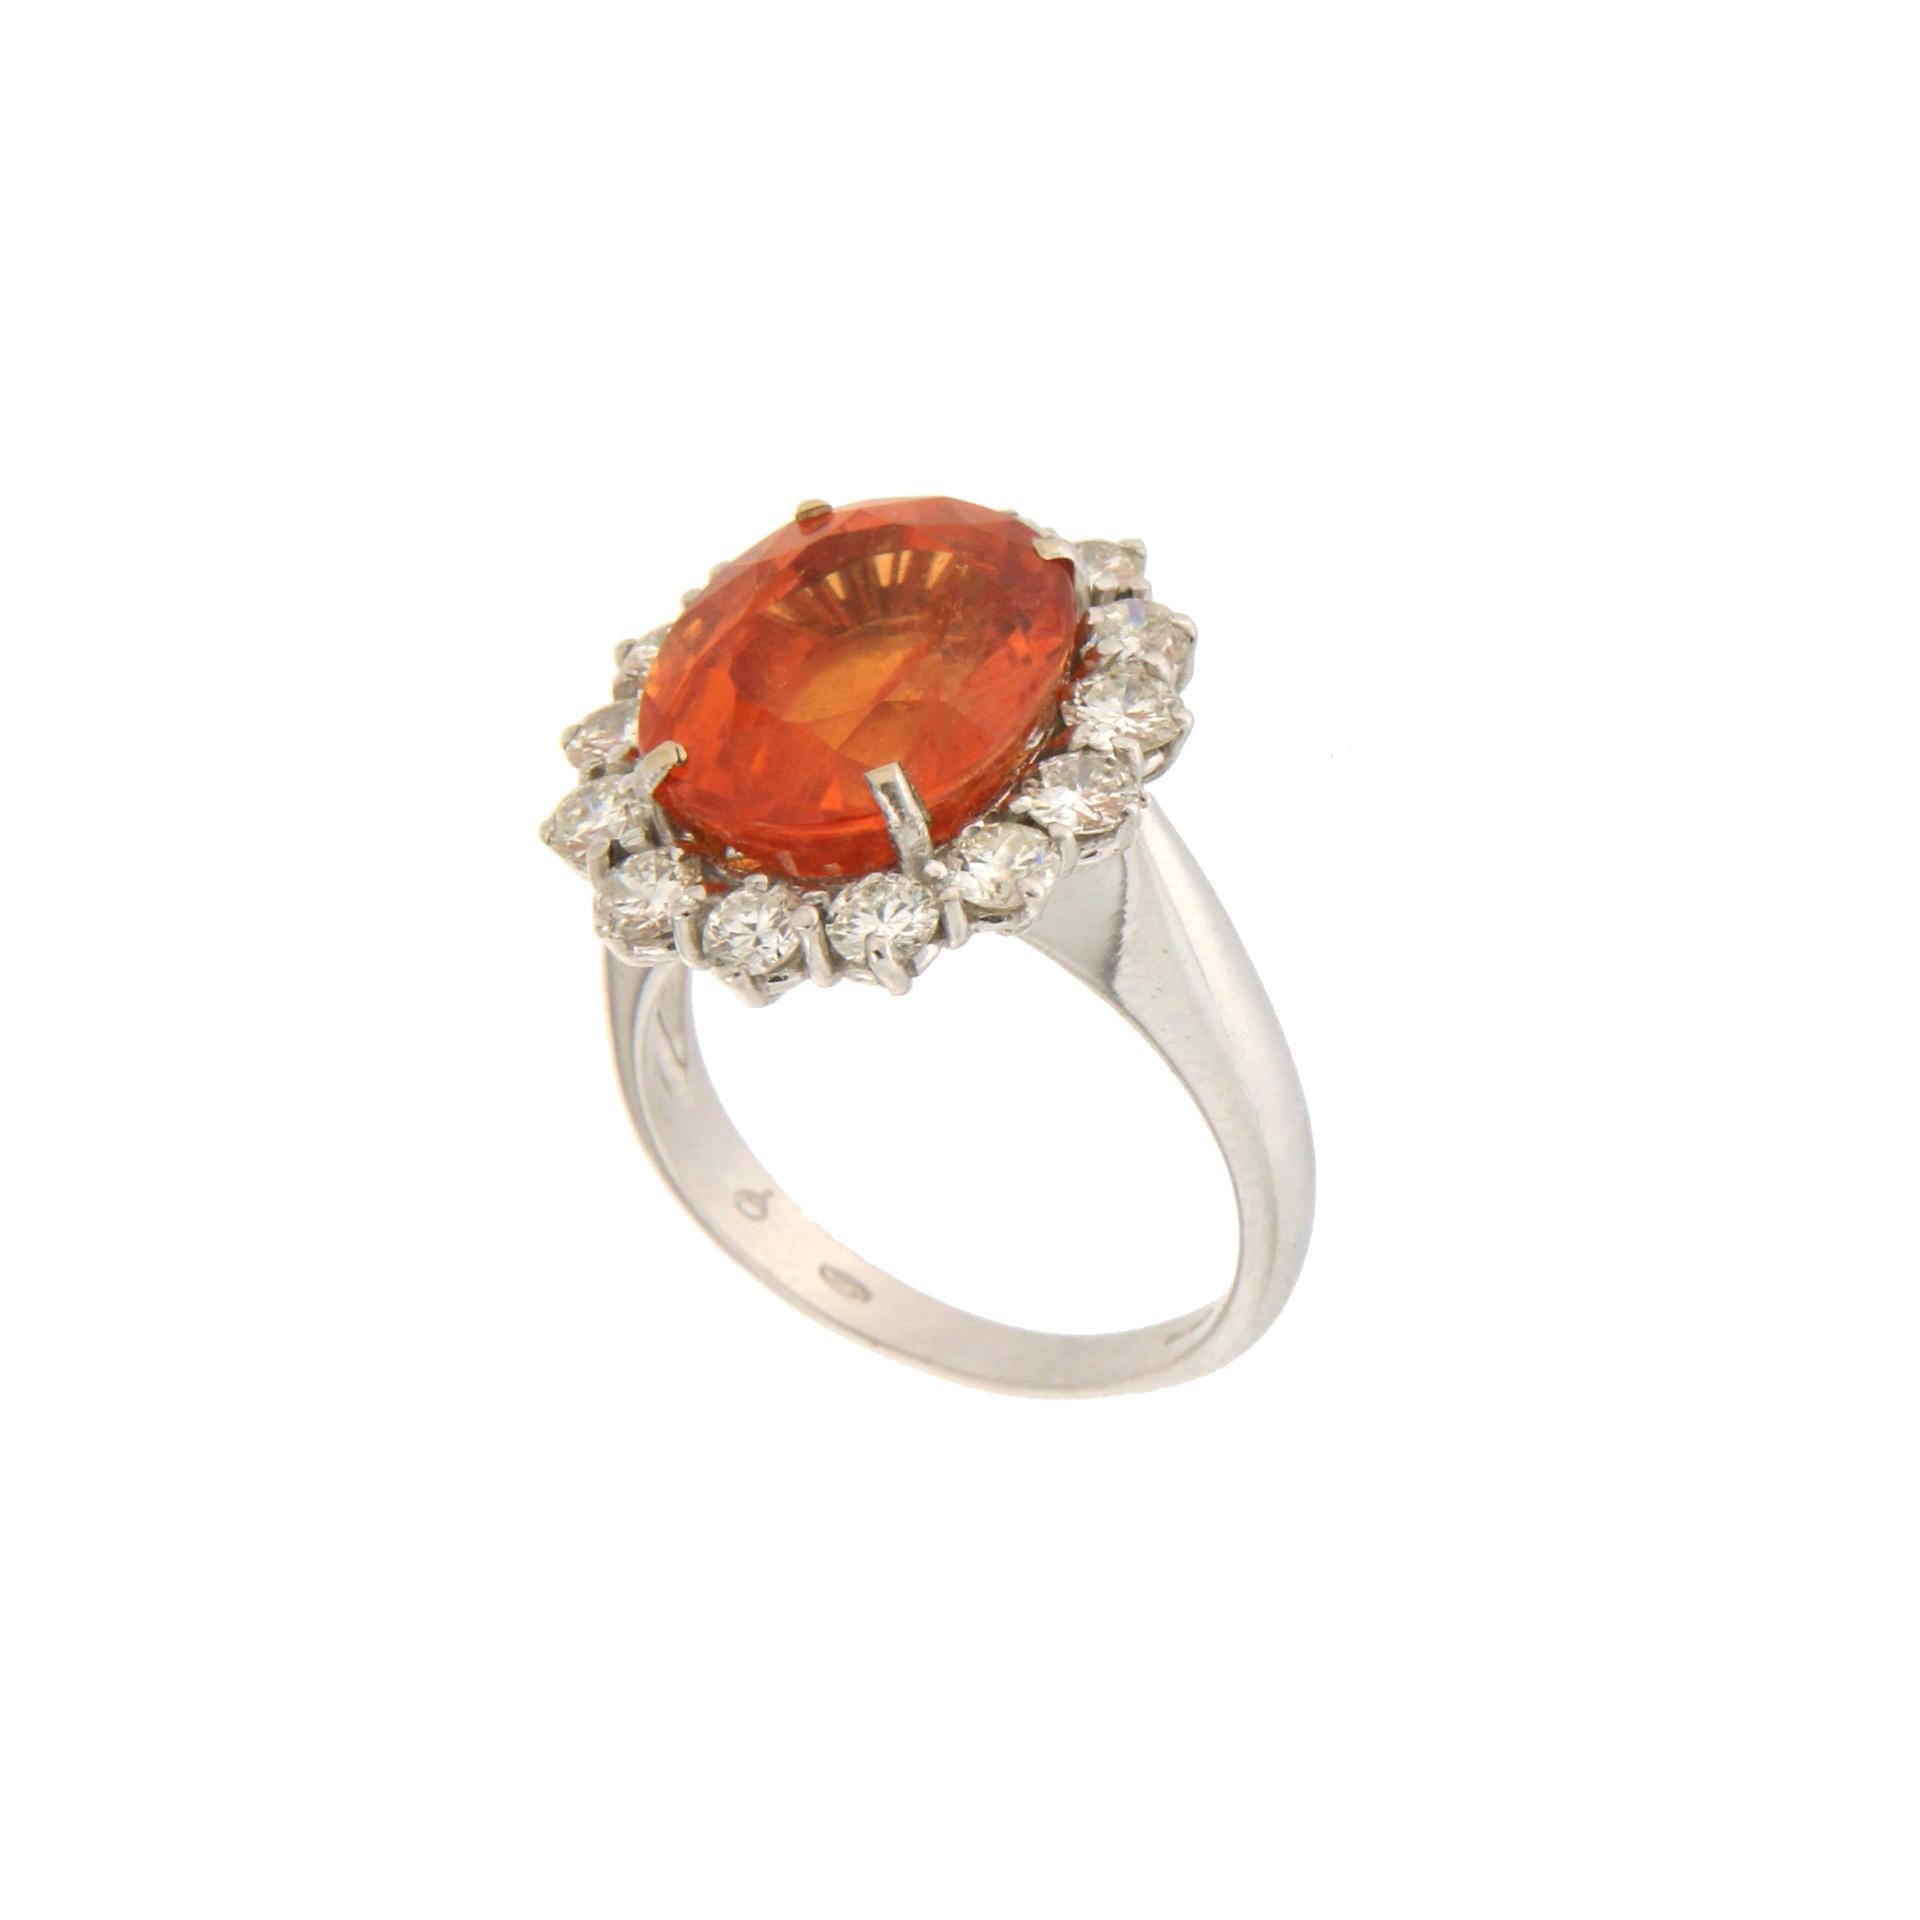 Handcraft Spessartite Garnet 18 Karat White Gold Diamonds Cocktail Ring In New Condition For Sale In Marcianise, IT